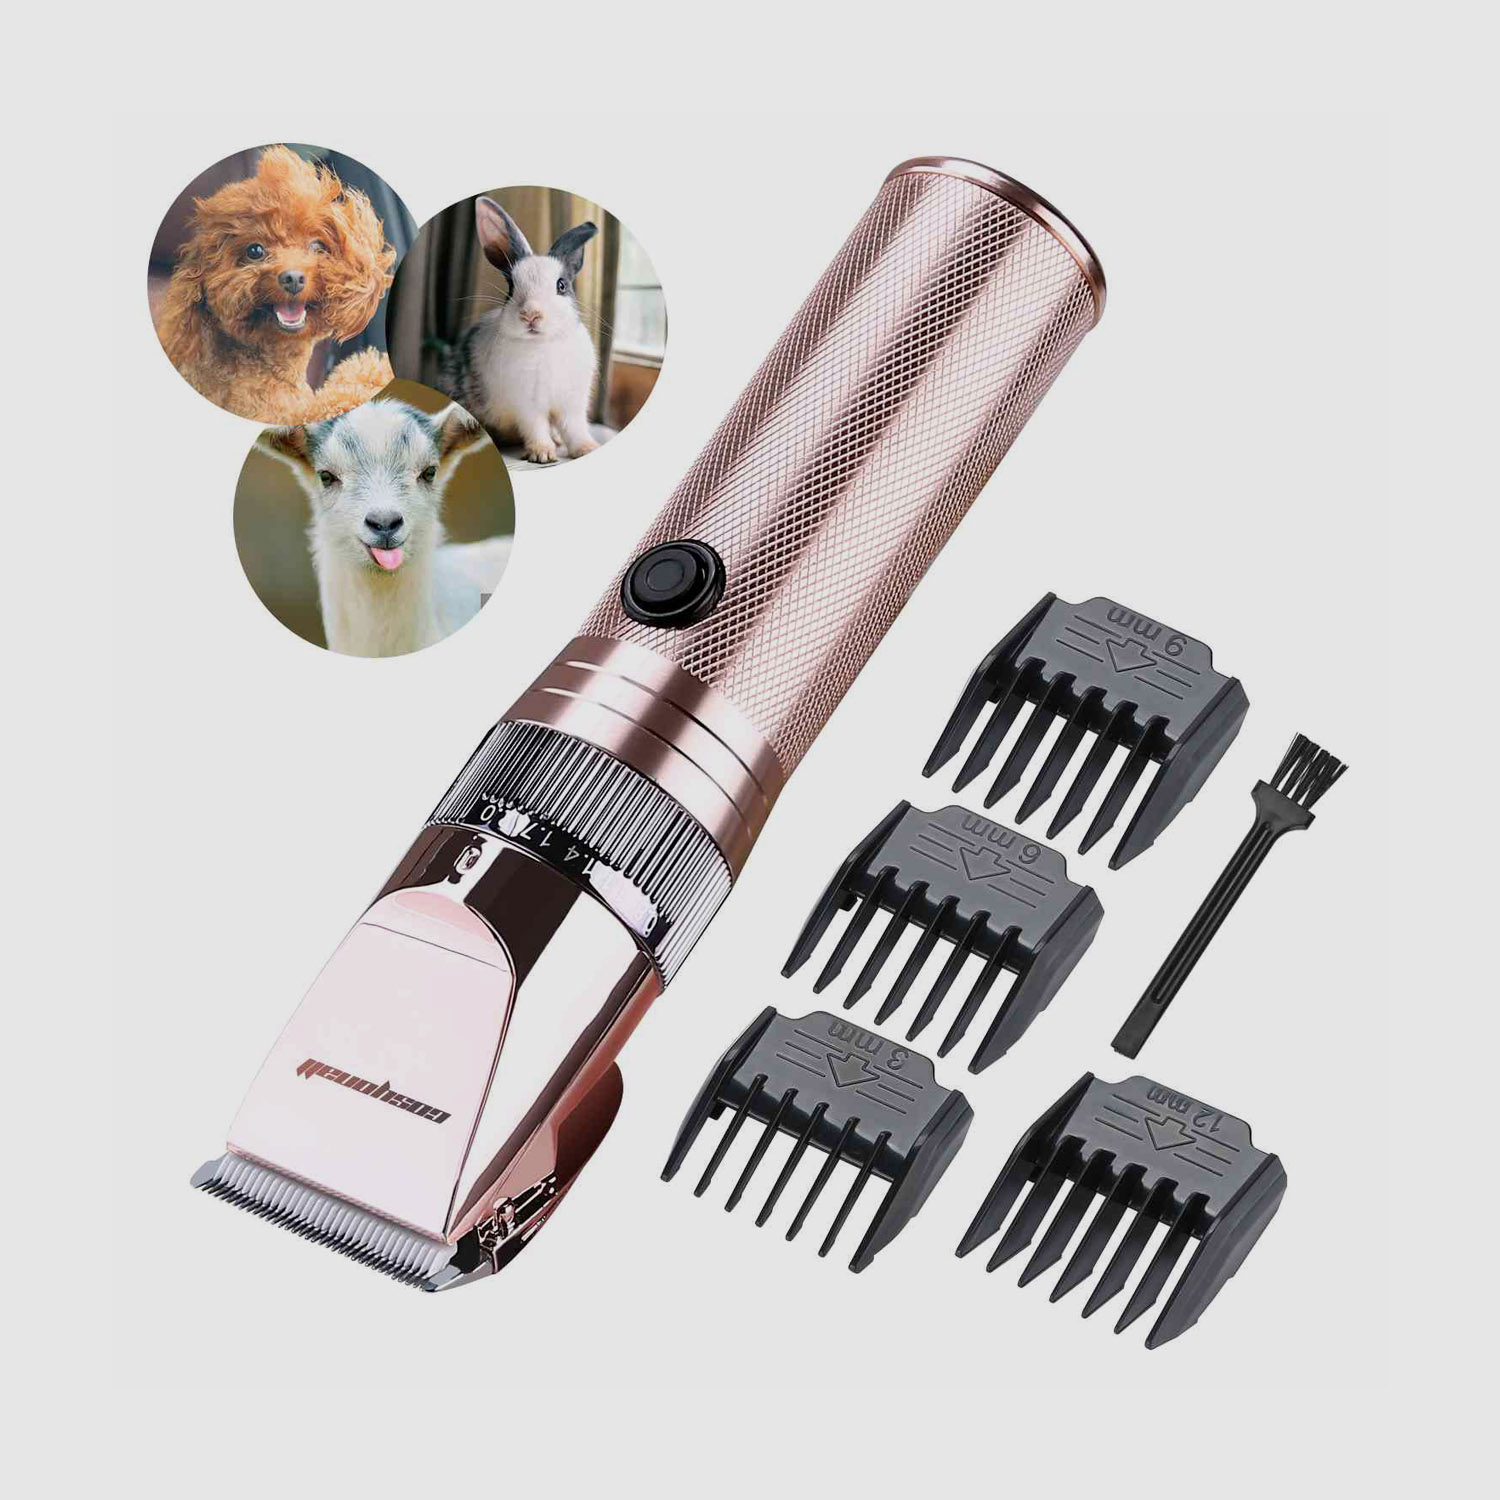 How to choose a good electric pet clippers